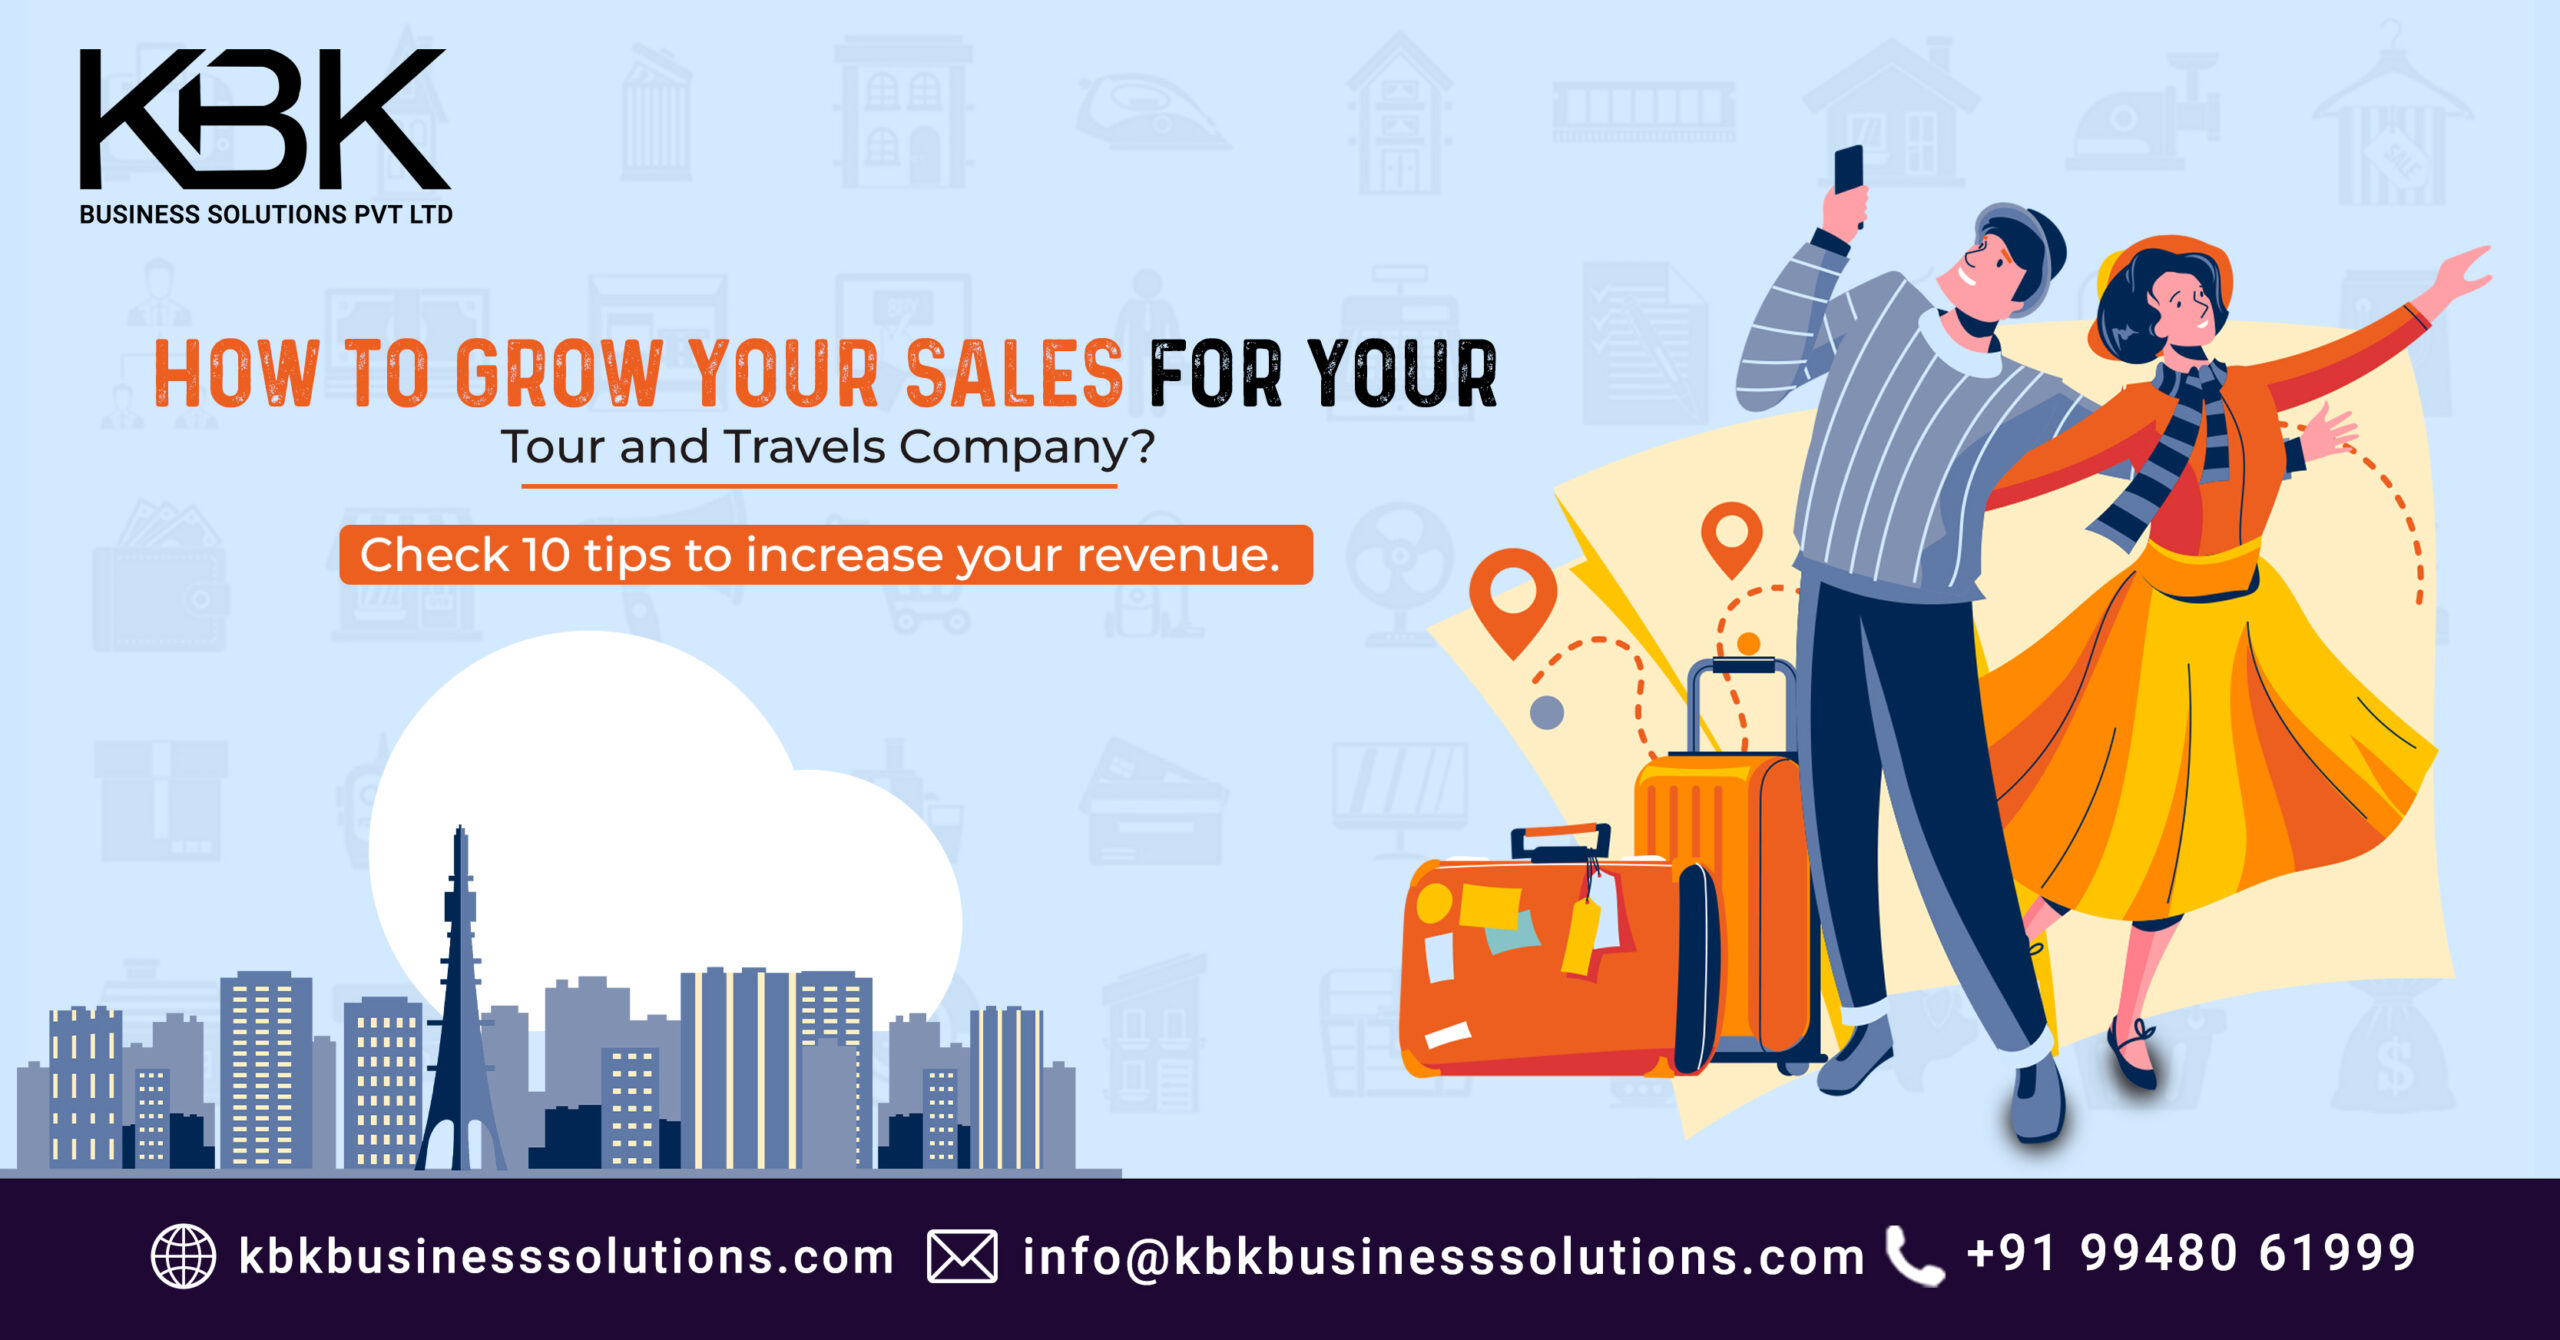 Grow Your Sales for Your Tours and Travels Company